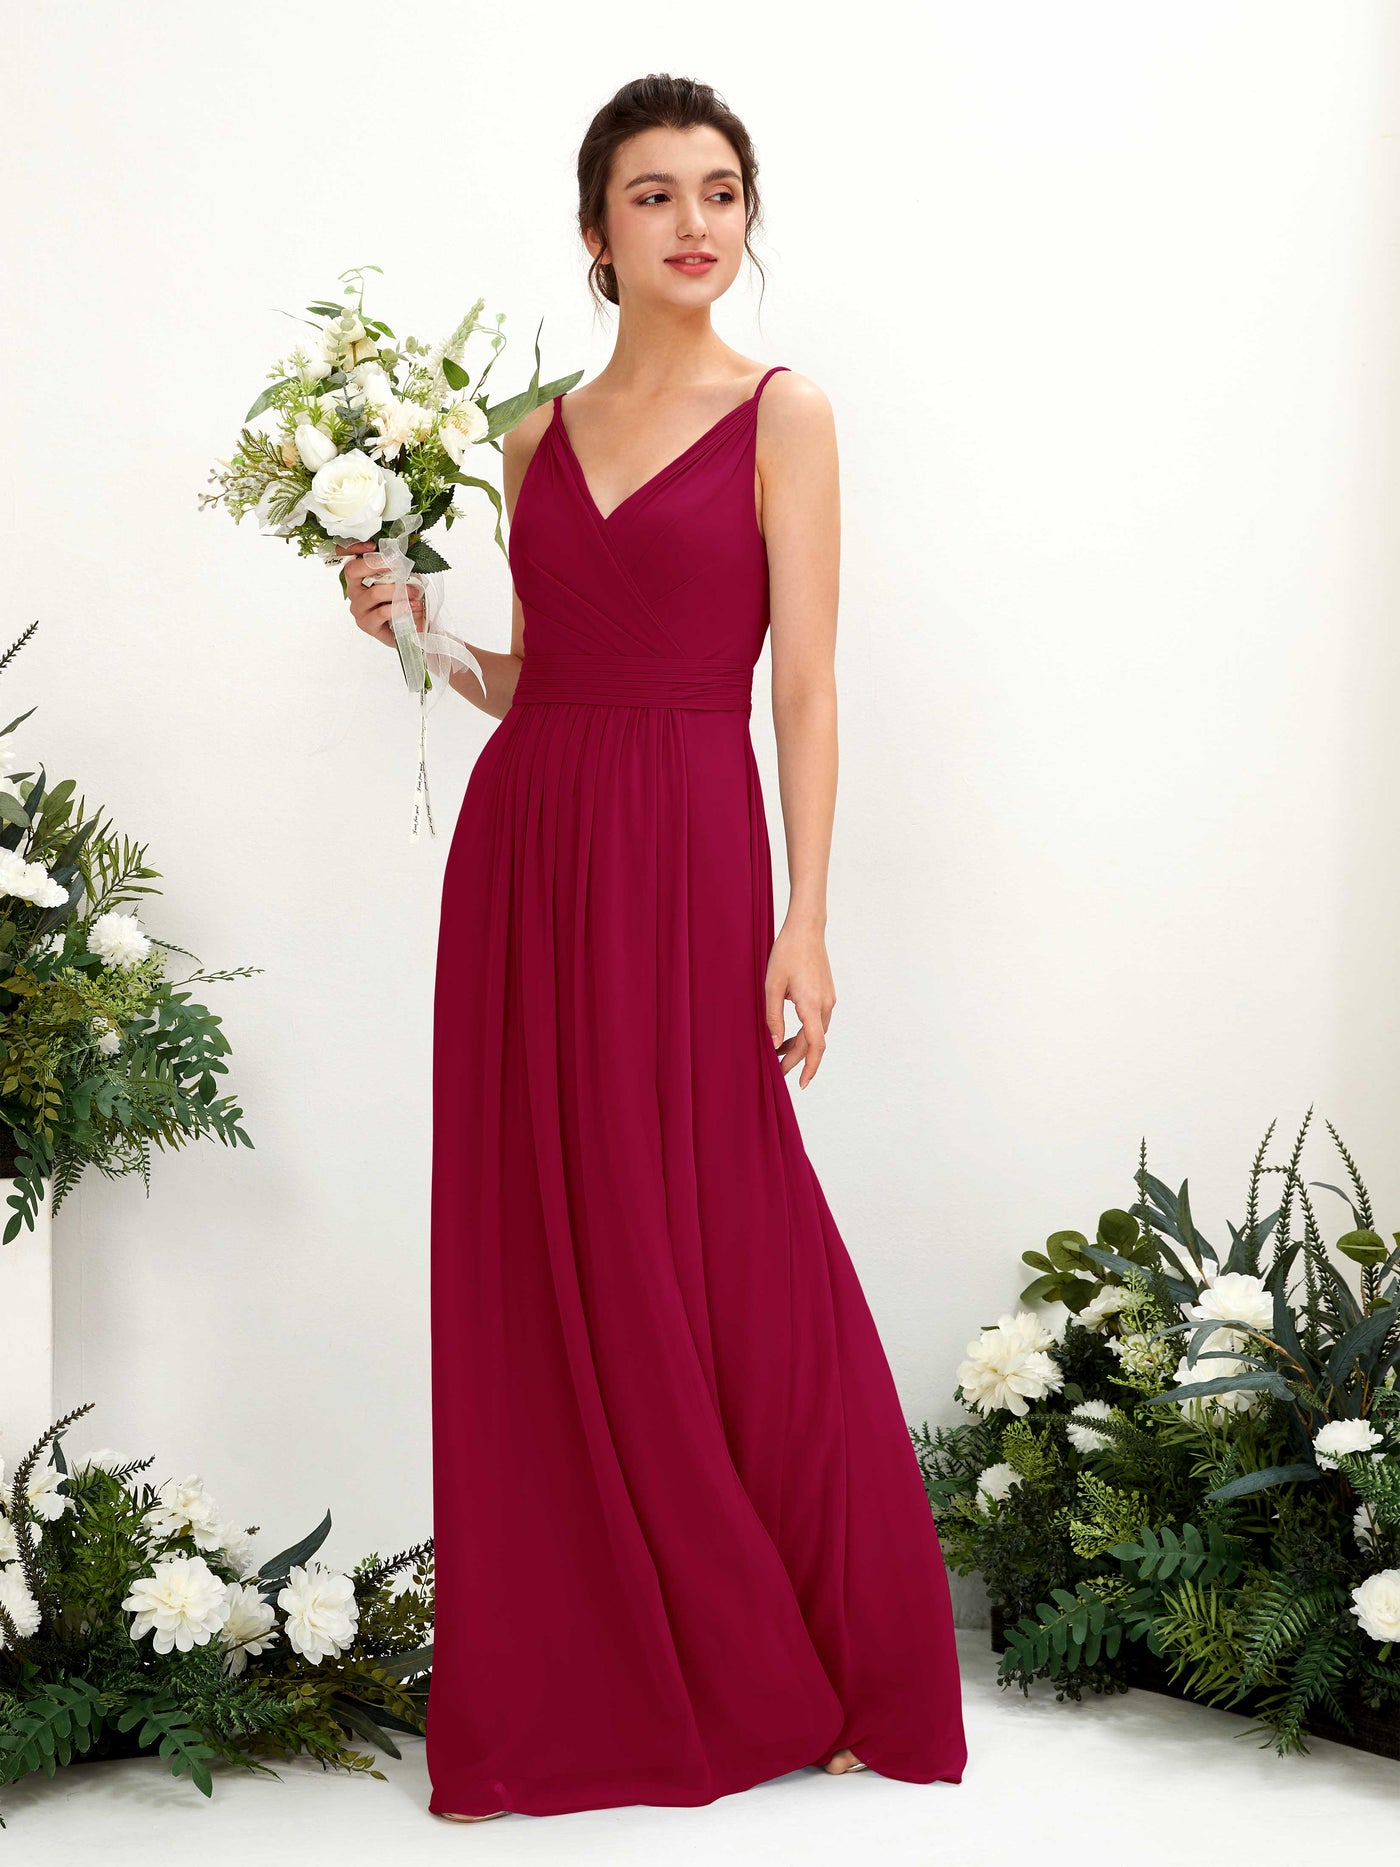 Jester Red Bridesmaid Dresses Bridesmaid Dress A-line Chiffon Spaghetti-straps Full Length Sleeveless Wedding Party Dress (81223941)#color_jester-red